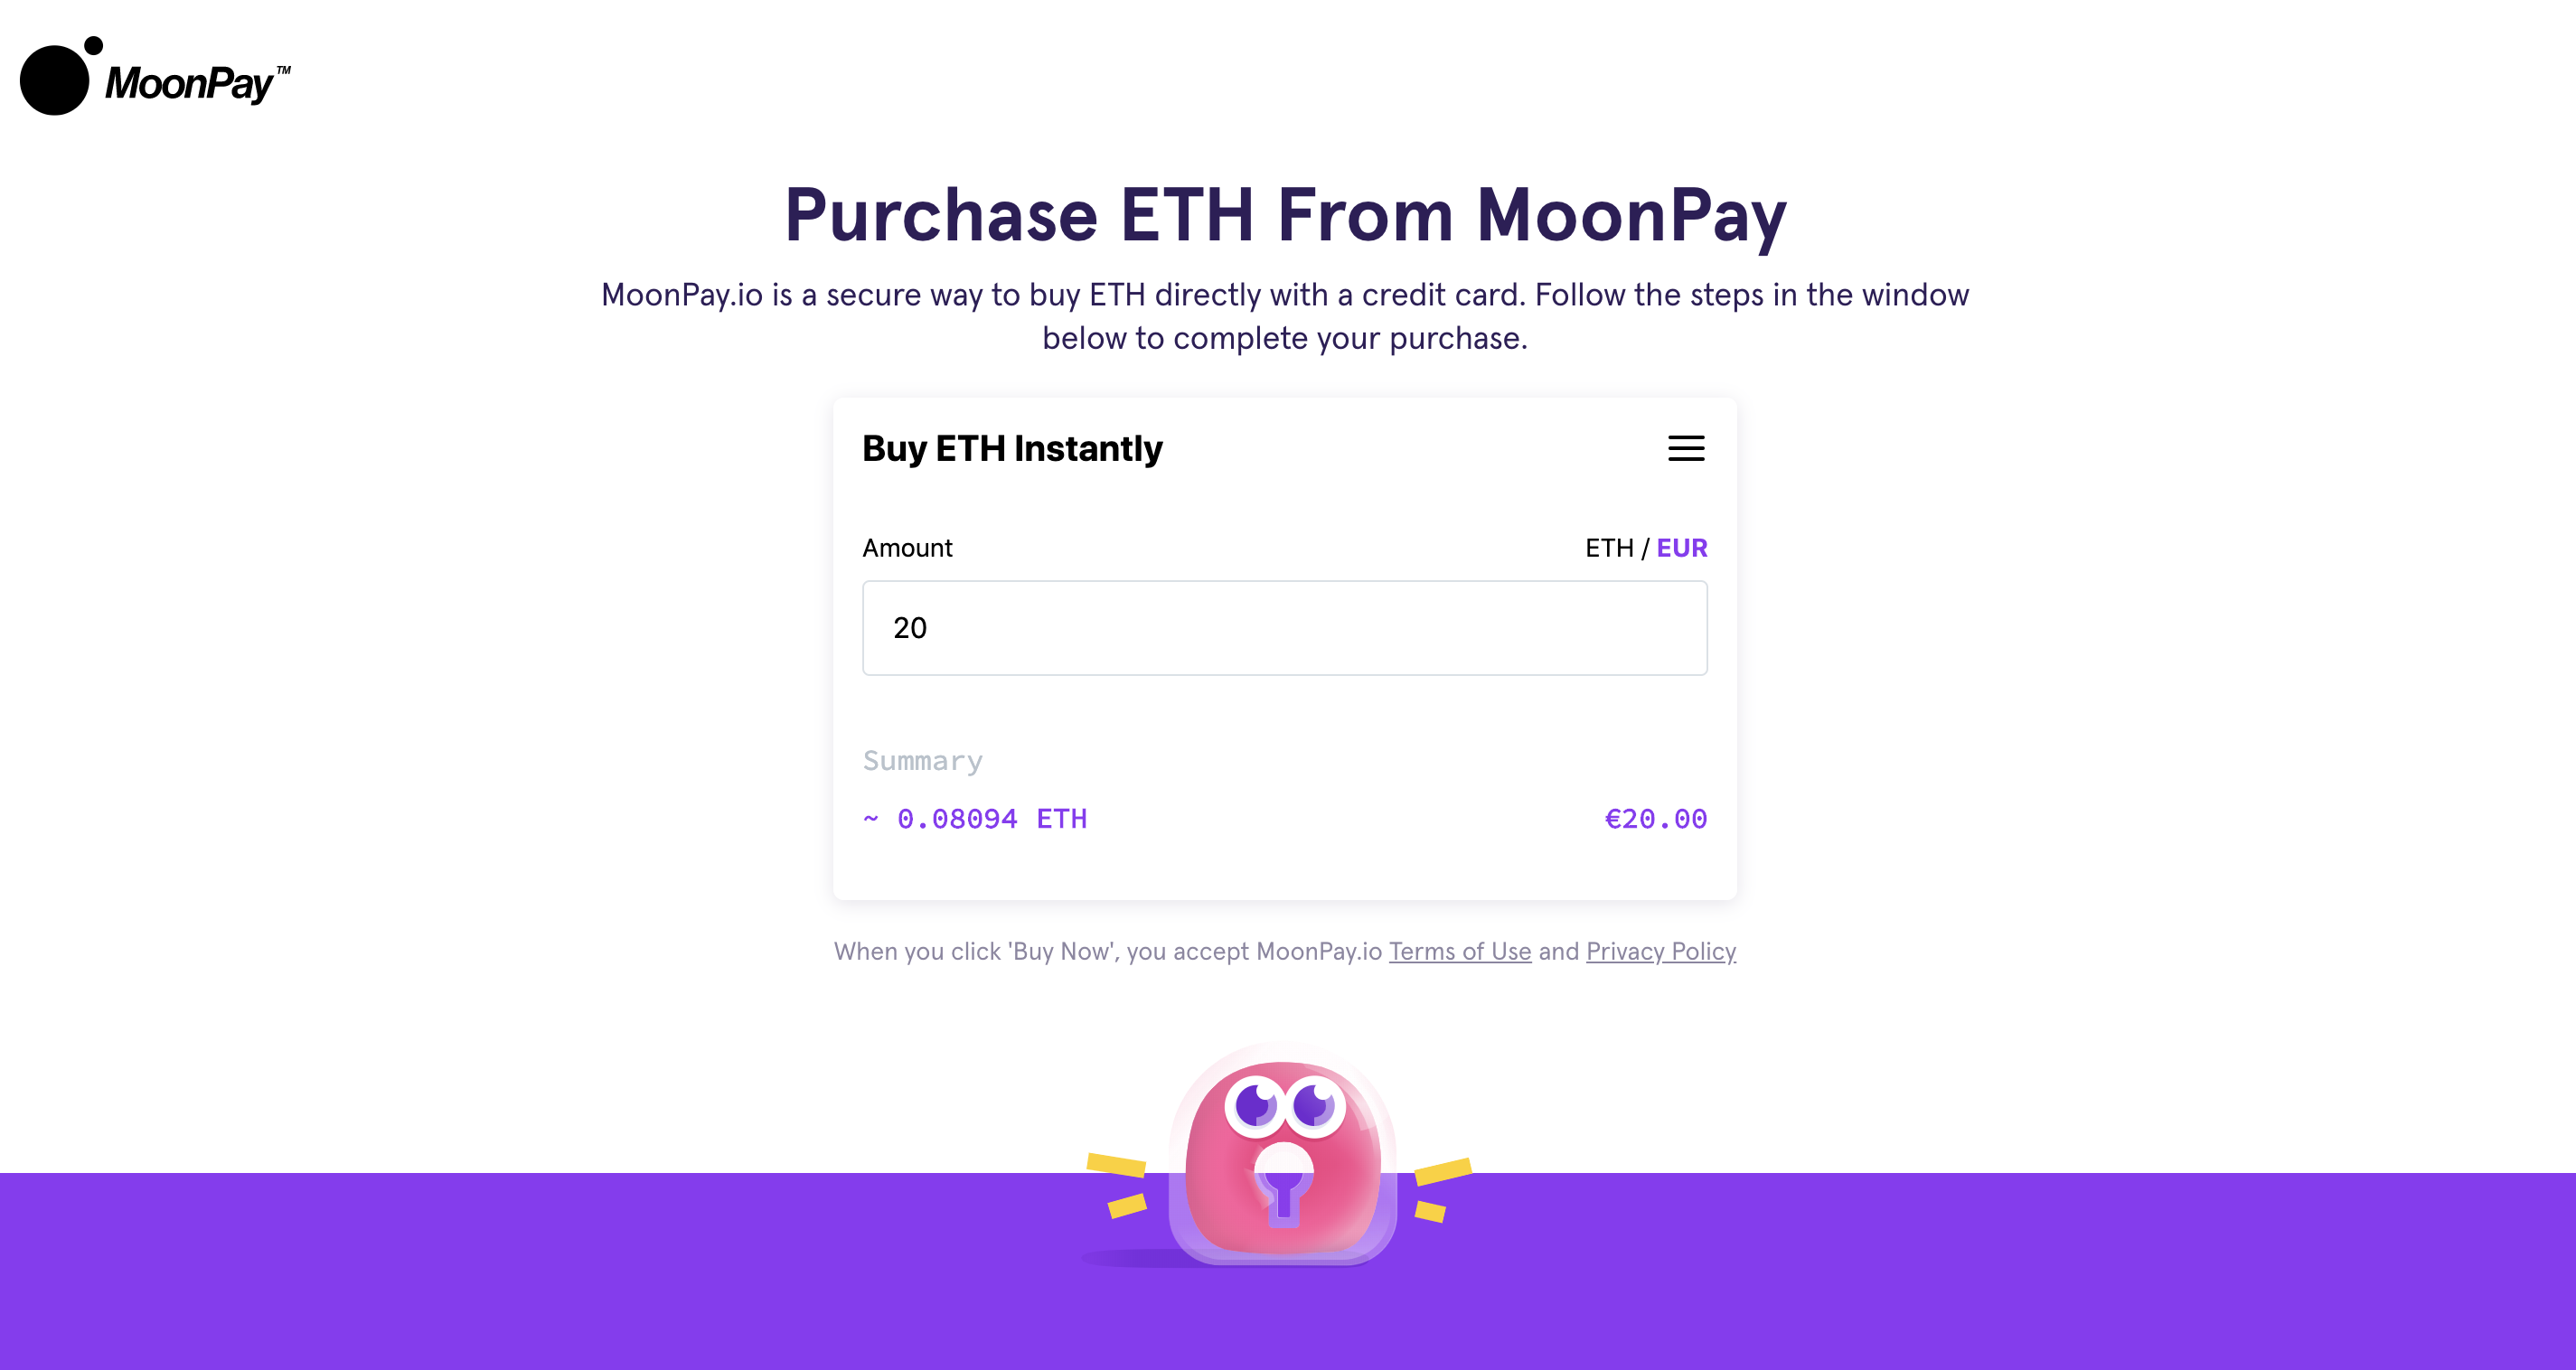 MoonPay.png